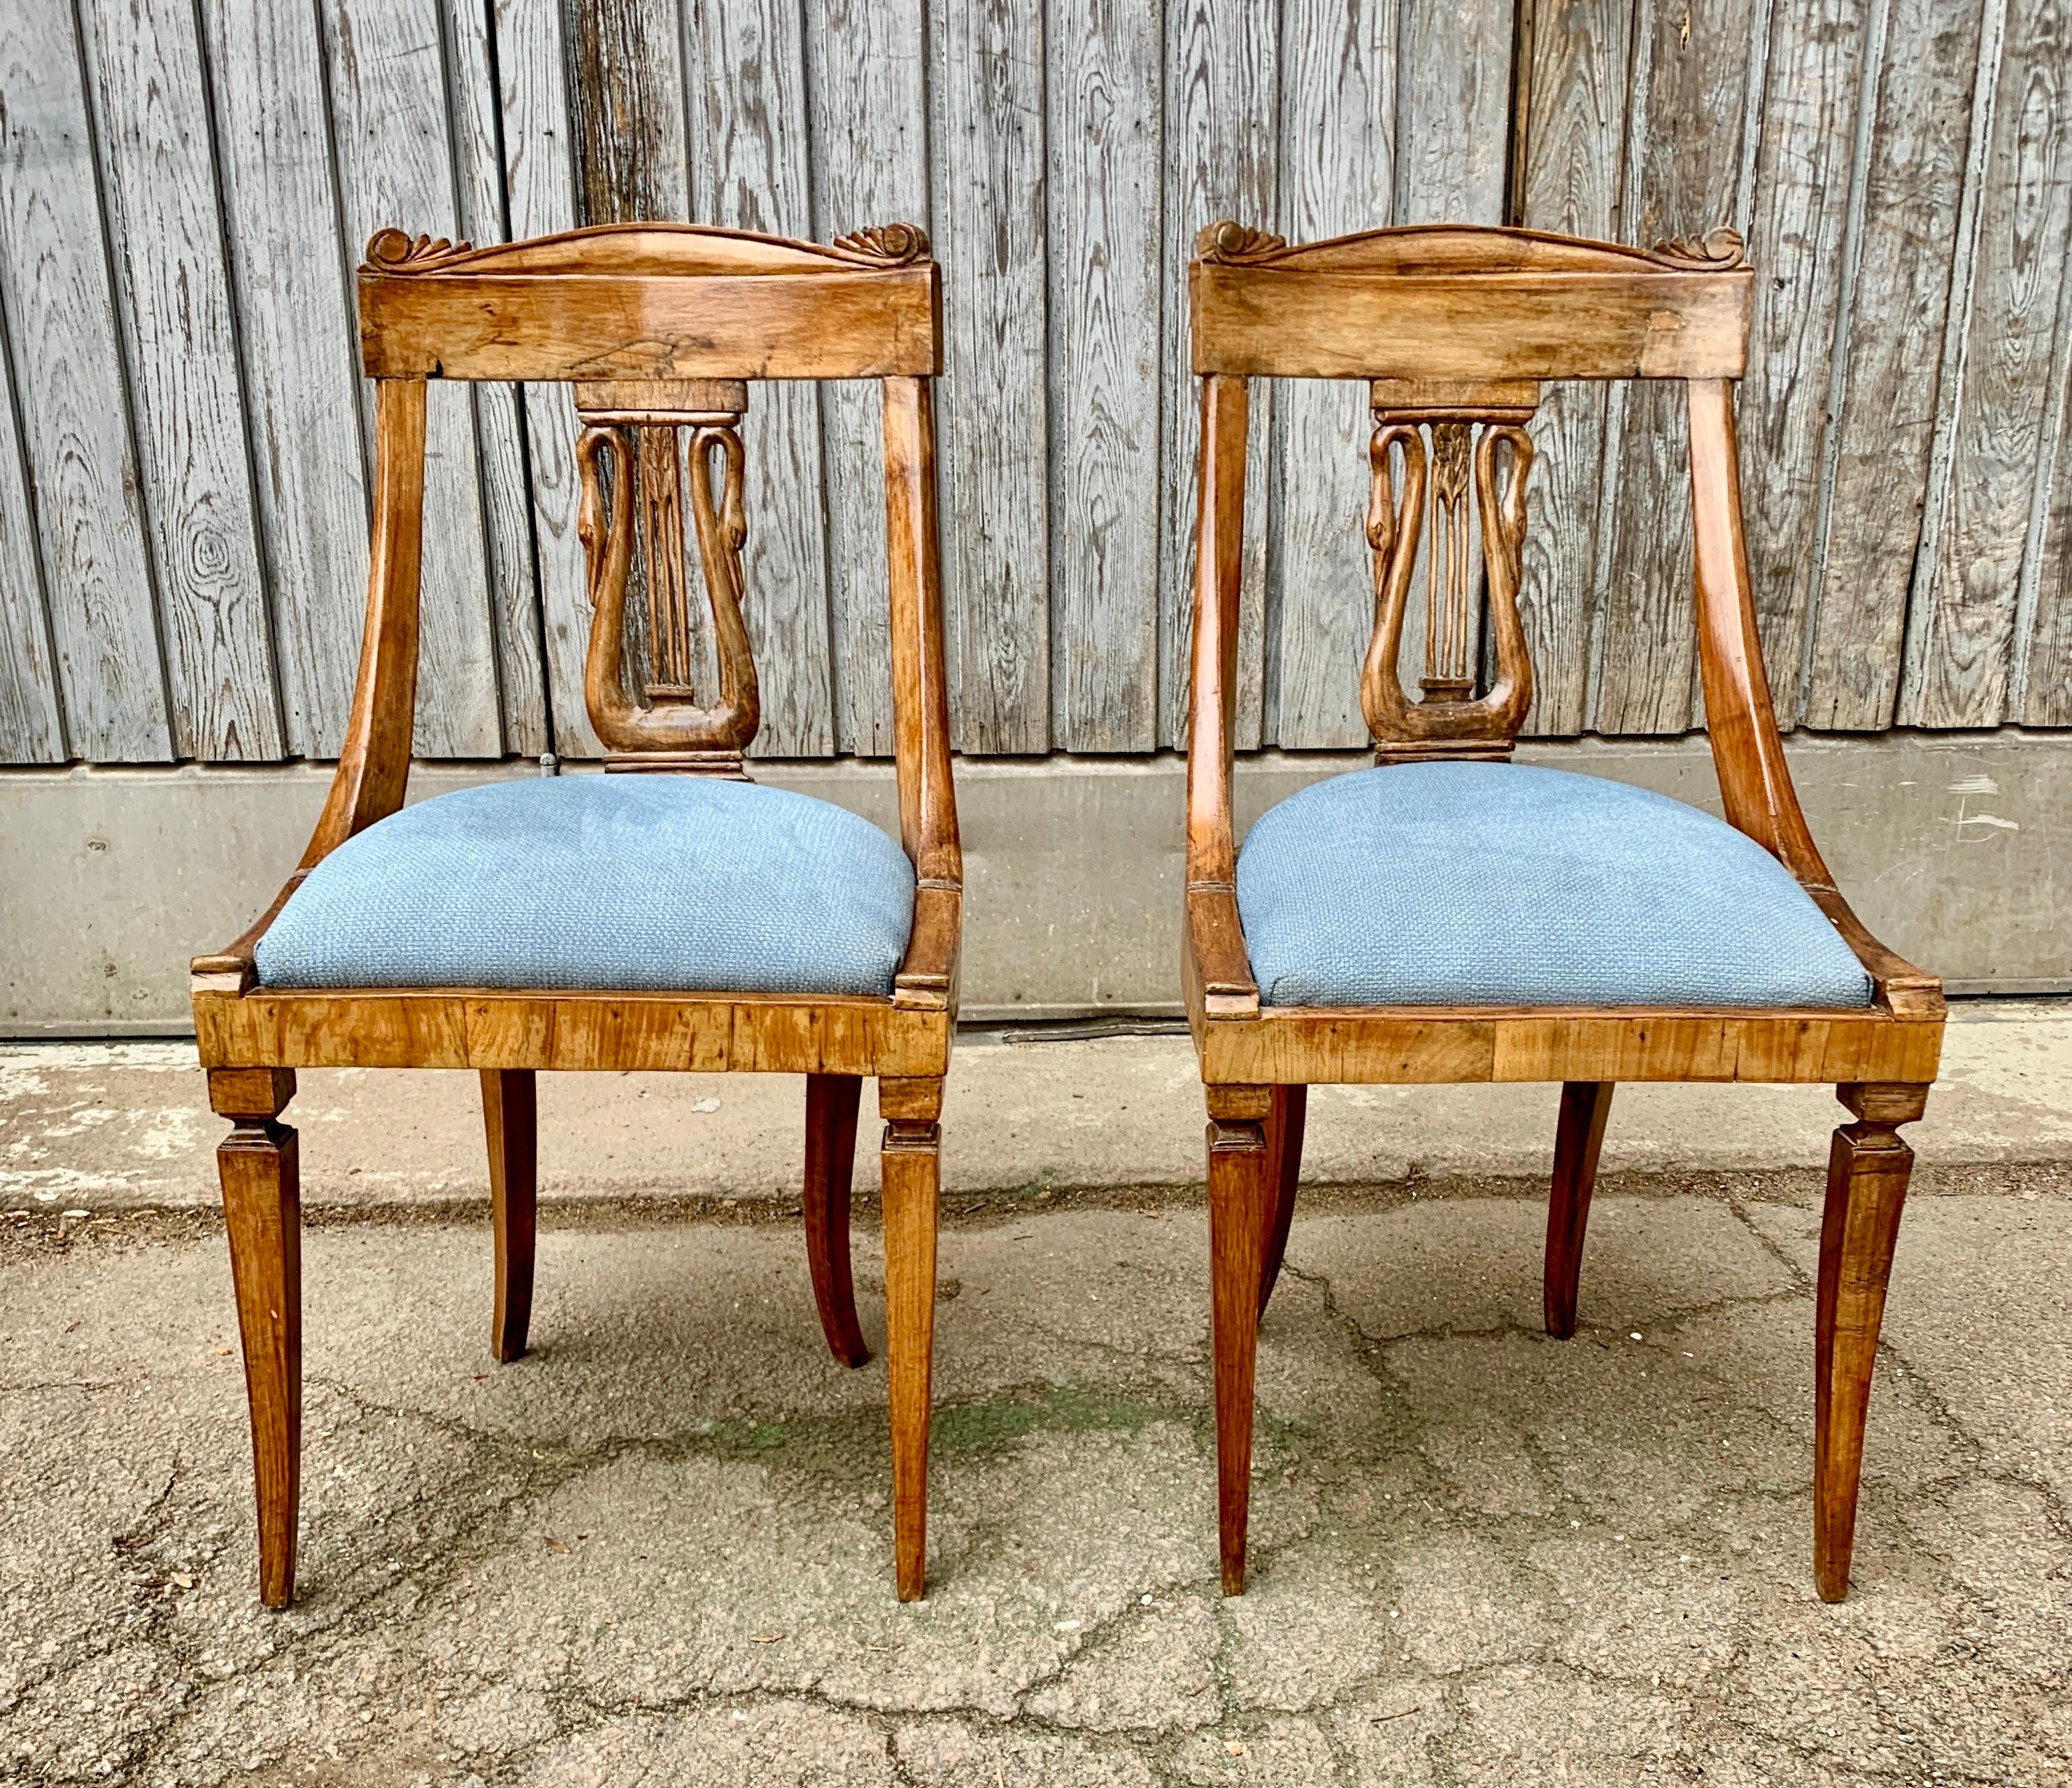 A pair of Italian early 19th Century Empire dining chairs in solid walnut.
This Tuscan pair of chairs, with swan decoration on the back, was likely crafted in the city of Lucca. This town is well known for its furniture and bronzes of that period.